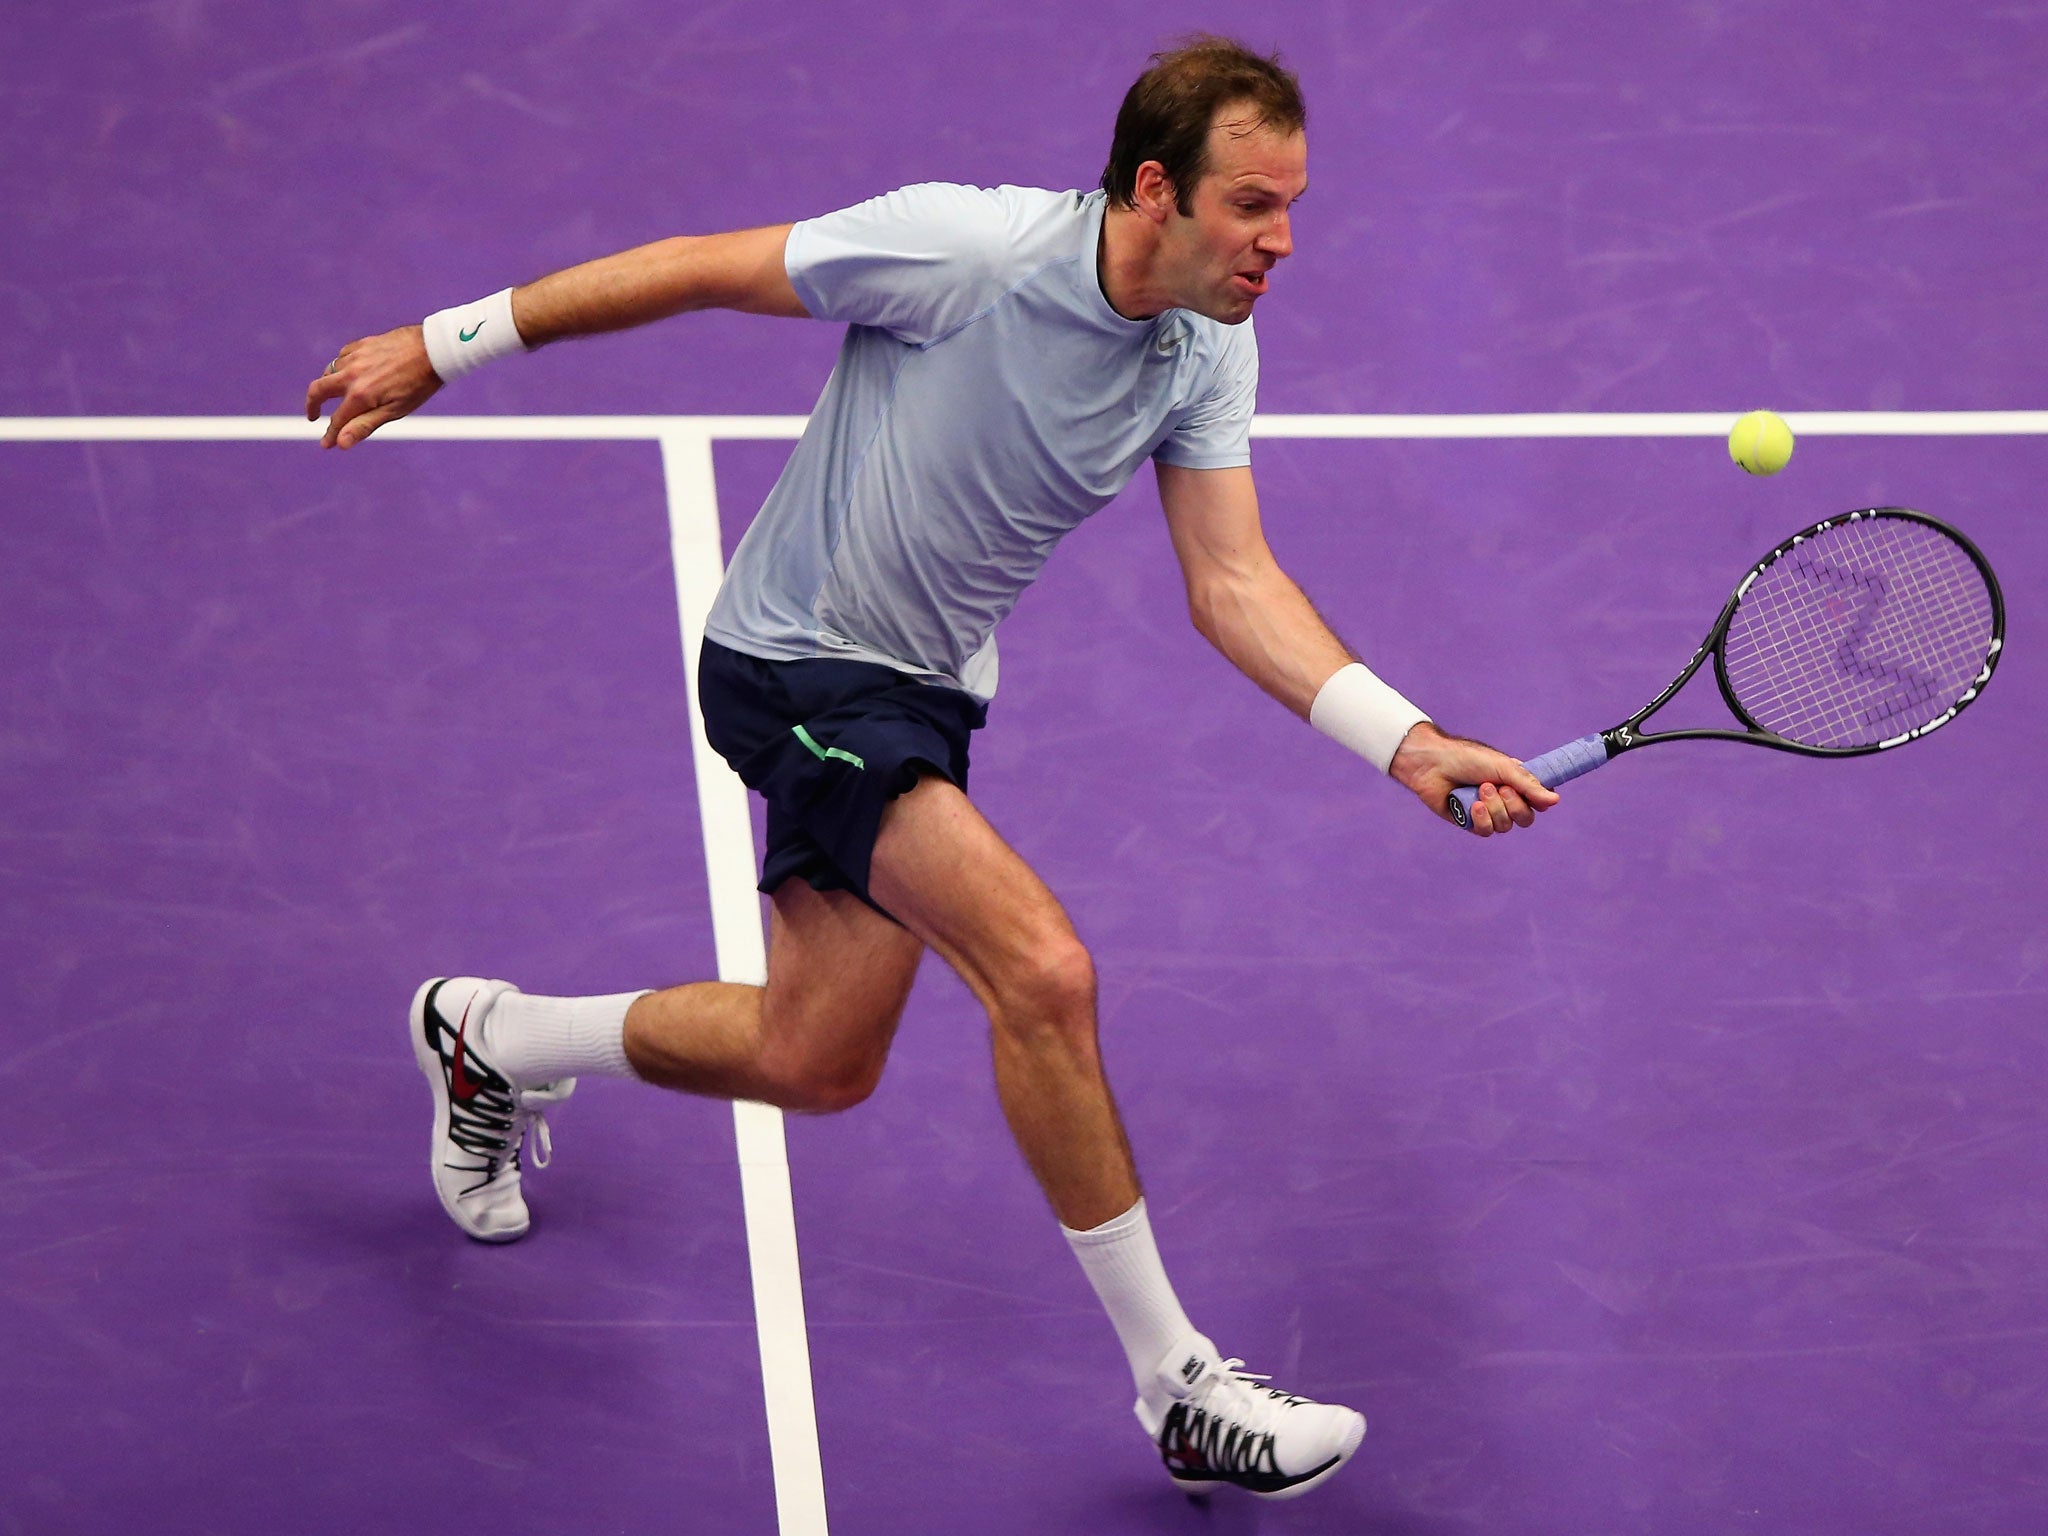 Greg Rusedski plays a forehand during his match against Pat Rafter at the Royal Albert Hall